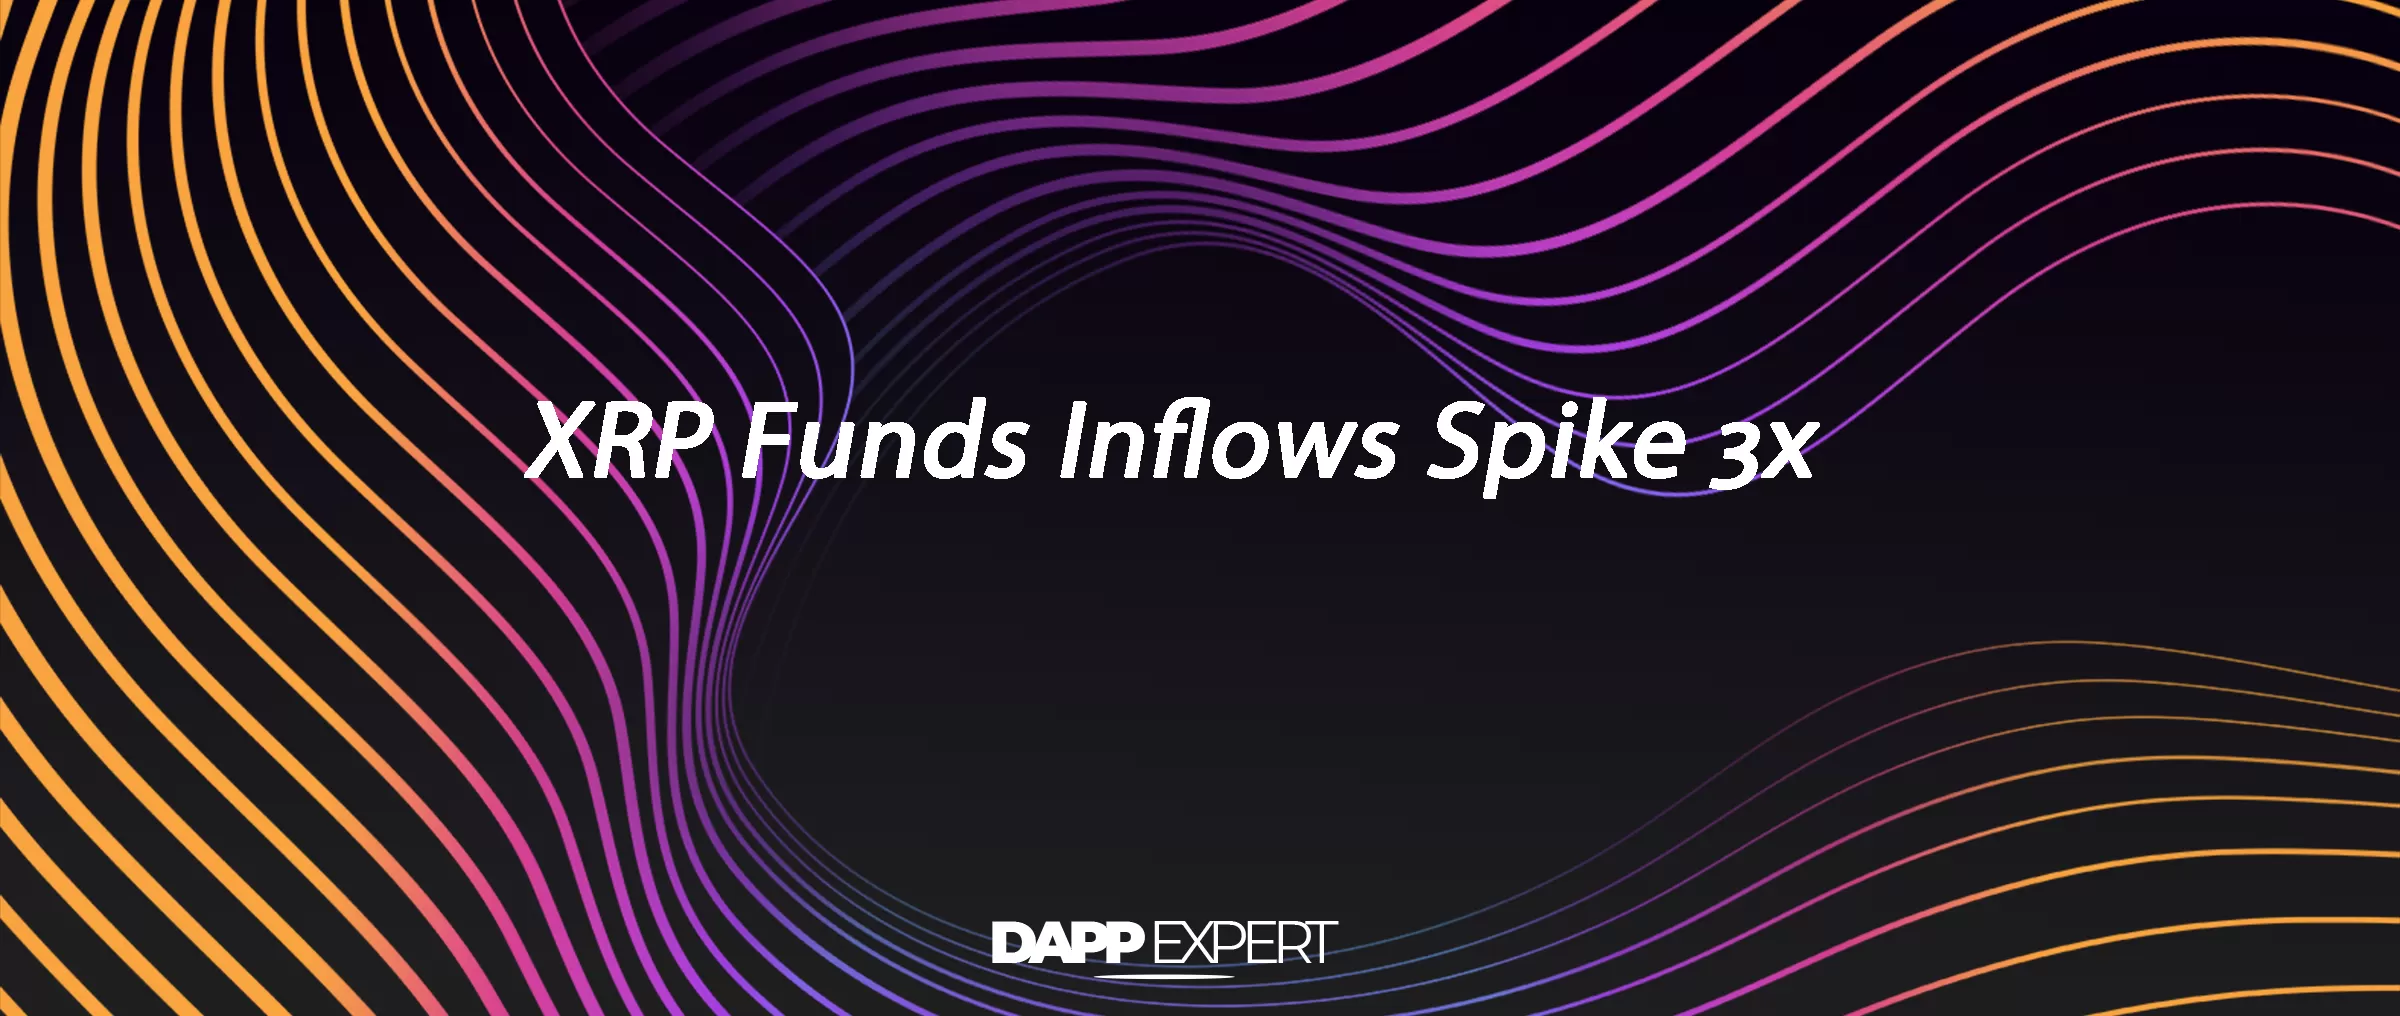 XRP Funds Inflows Spike 3x